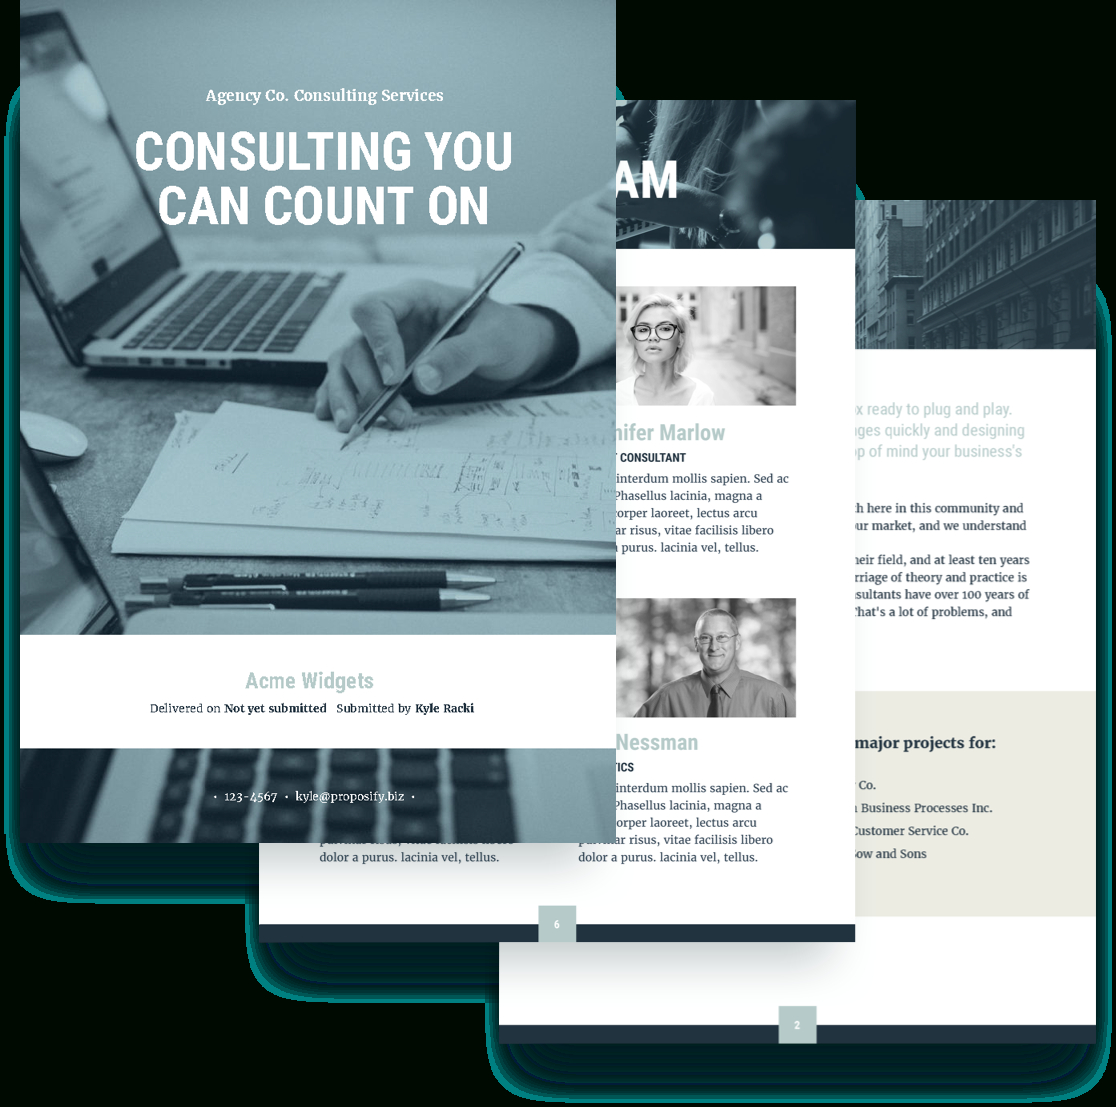 Consulting Proposal Template – Free Sample | Proposify With Regard To Consultant Proposal Template